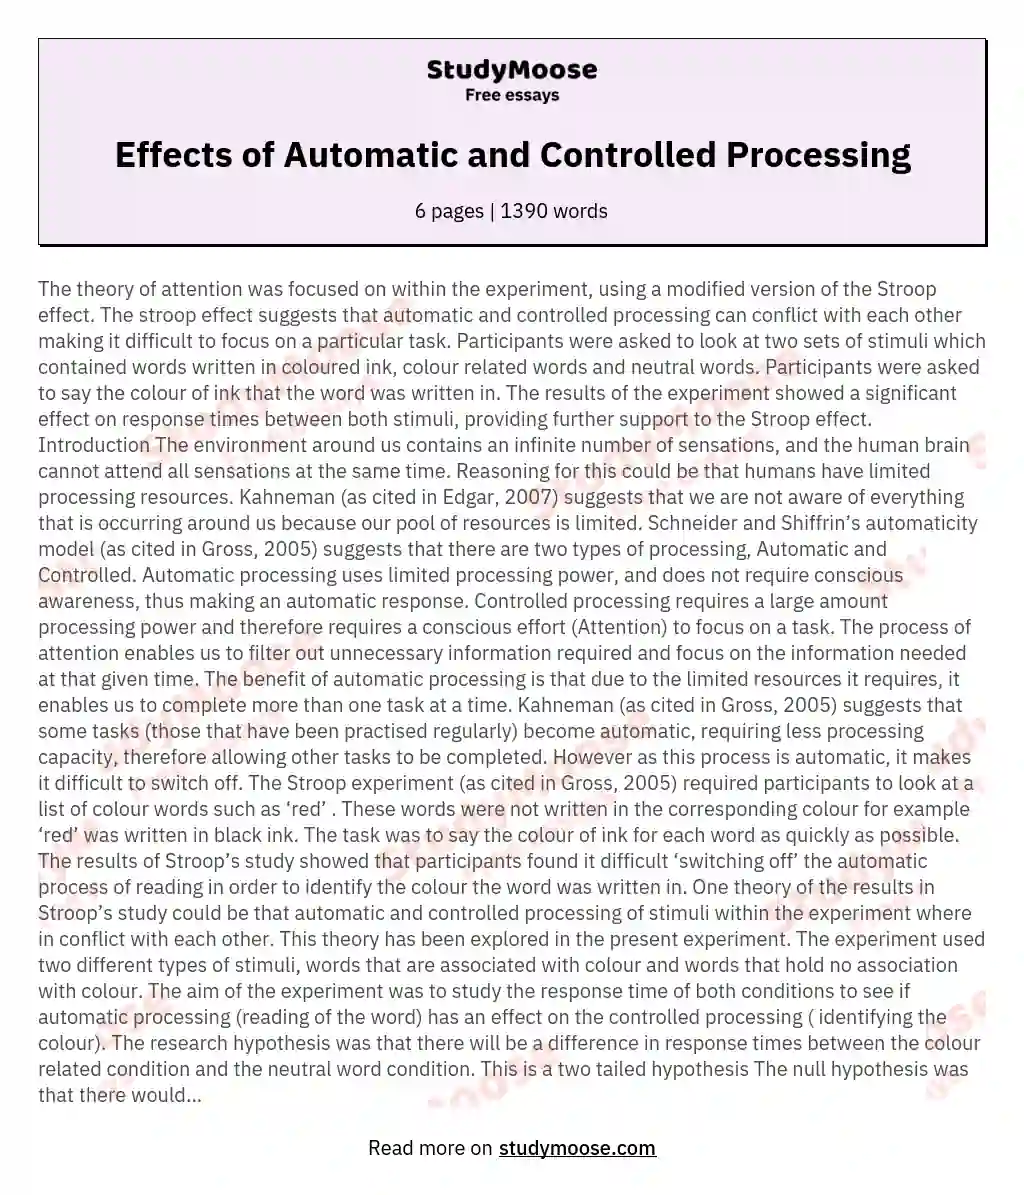 Effects of Automatic and Controlled Processing essay